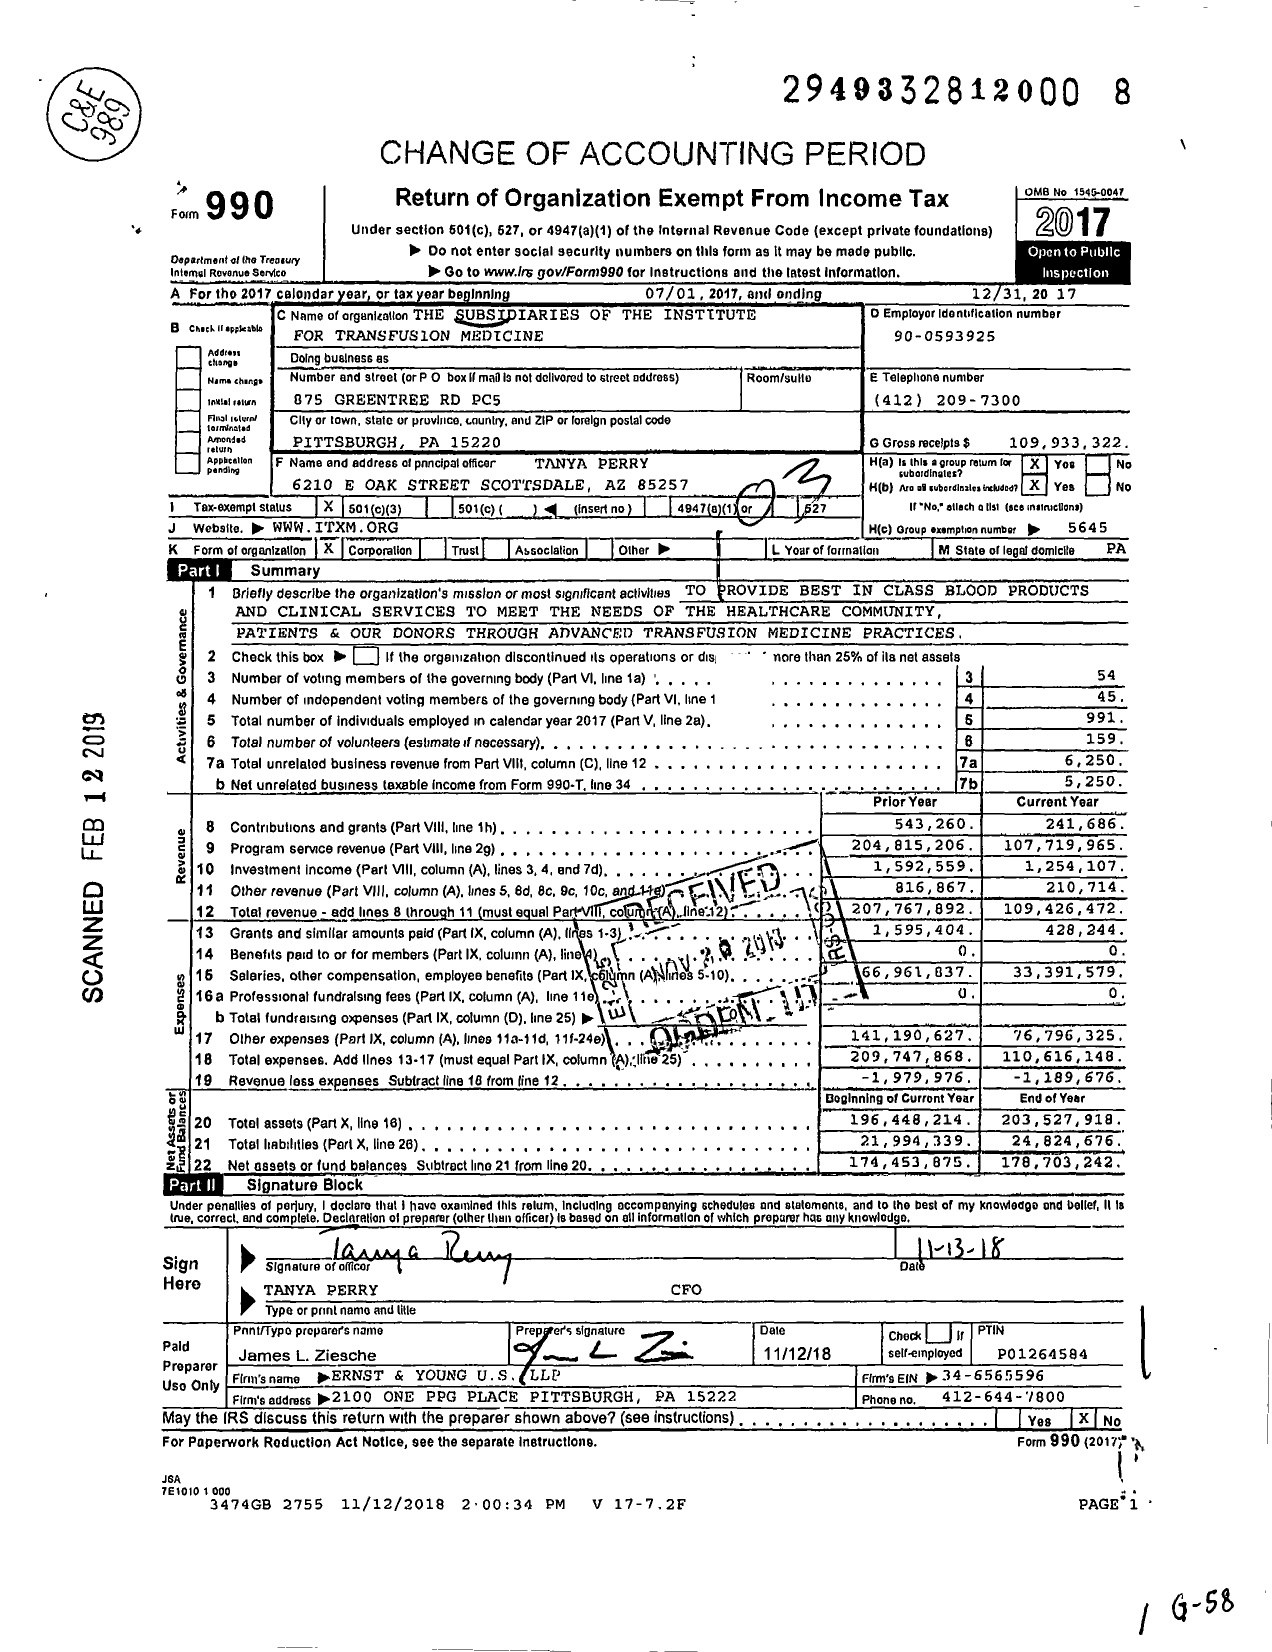 Image of first page of 2017 Form 990 for the Subsidiaries of the Institute FOR TRANSFUSION MEDICINE